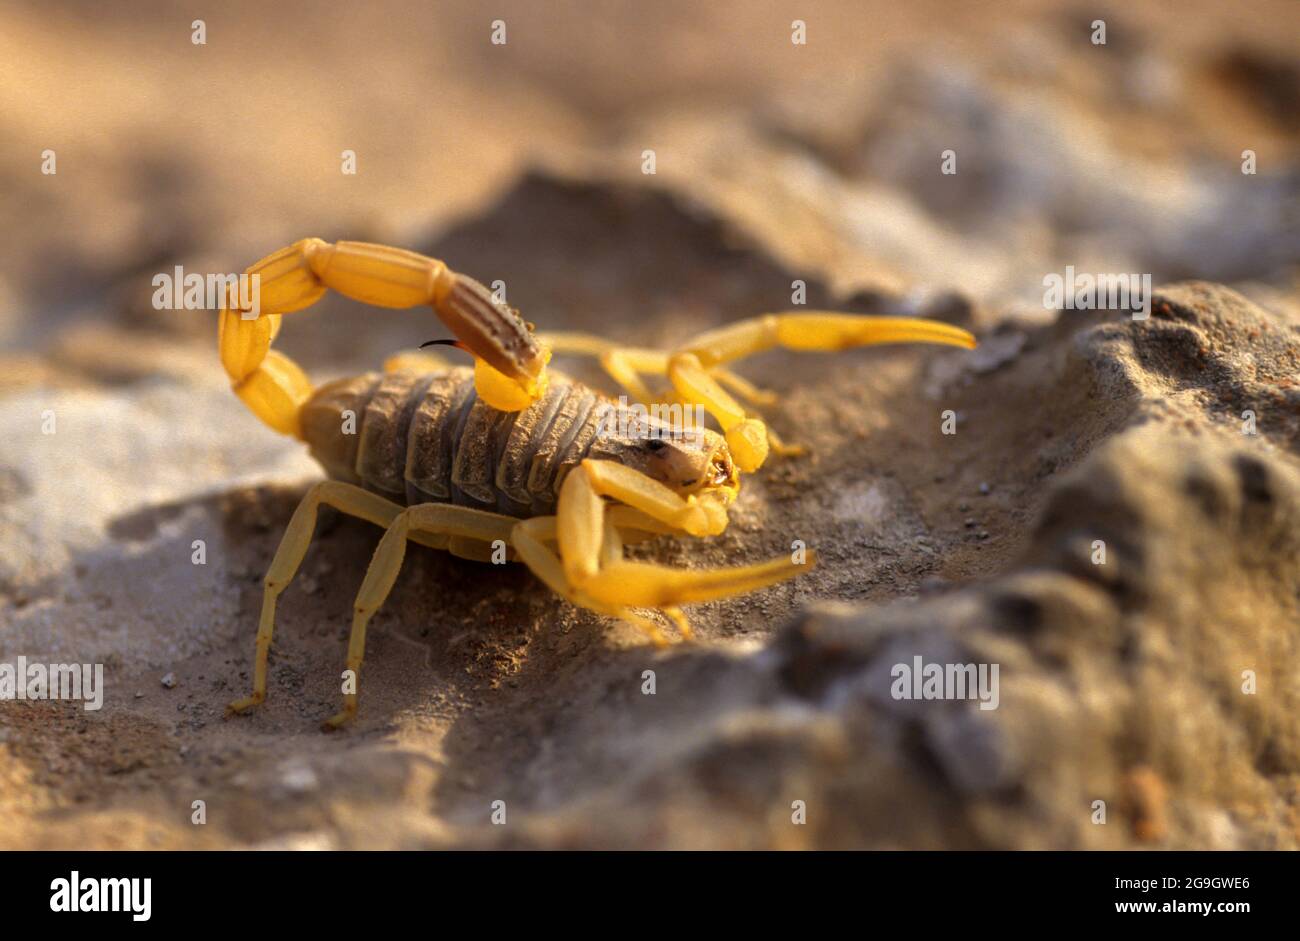 Leiurus hebraeus, the Hebrew deathstalker, is a species of scorpion, a member of the family Buthidae. It is also known as the Israeli yellow scorpion. Stock Photo